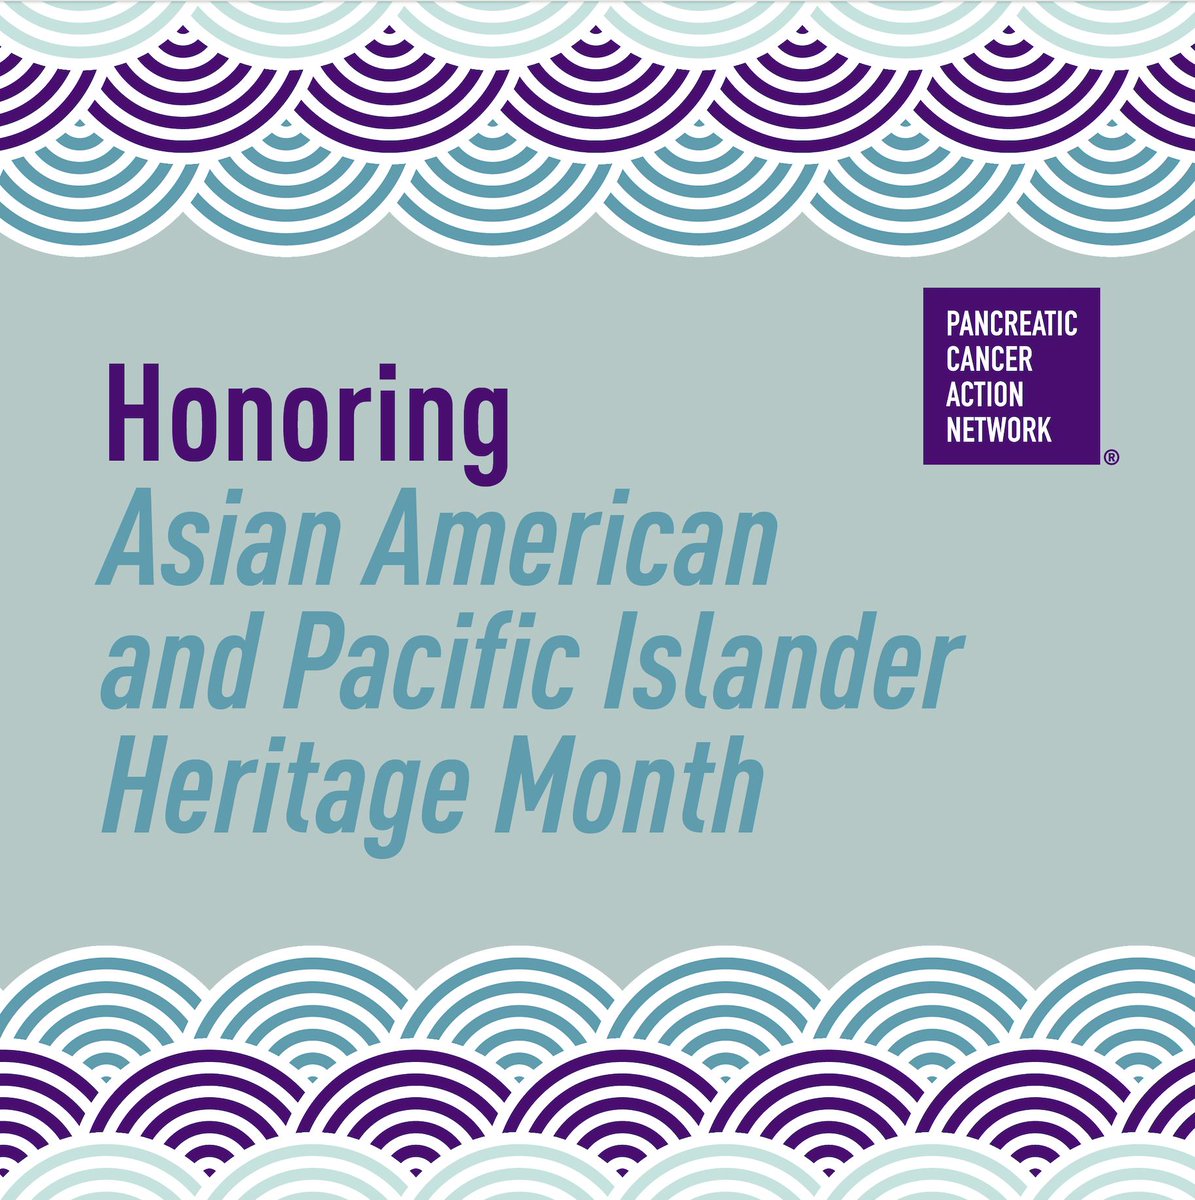 May is Asian American and Pacific Islander Heritage Month! 💜 The AAPI community includes many diverse cultures, languages and people. Because of this, the AAPI community also experiences varying needs, barriers and disparities when it comes to #pancreaticcancer care. For a